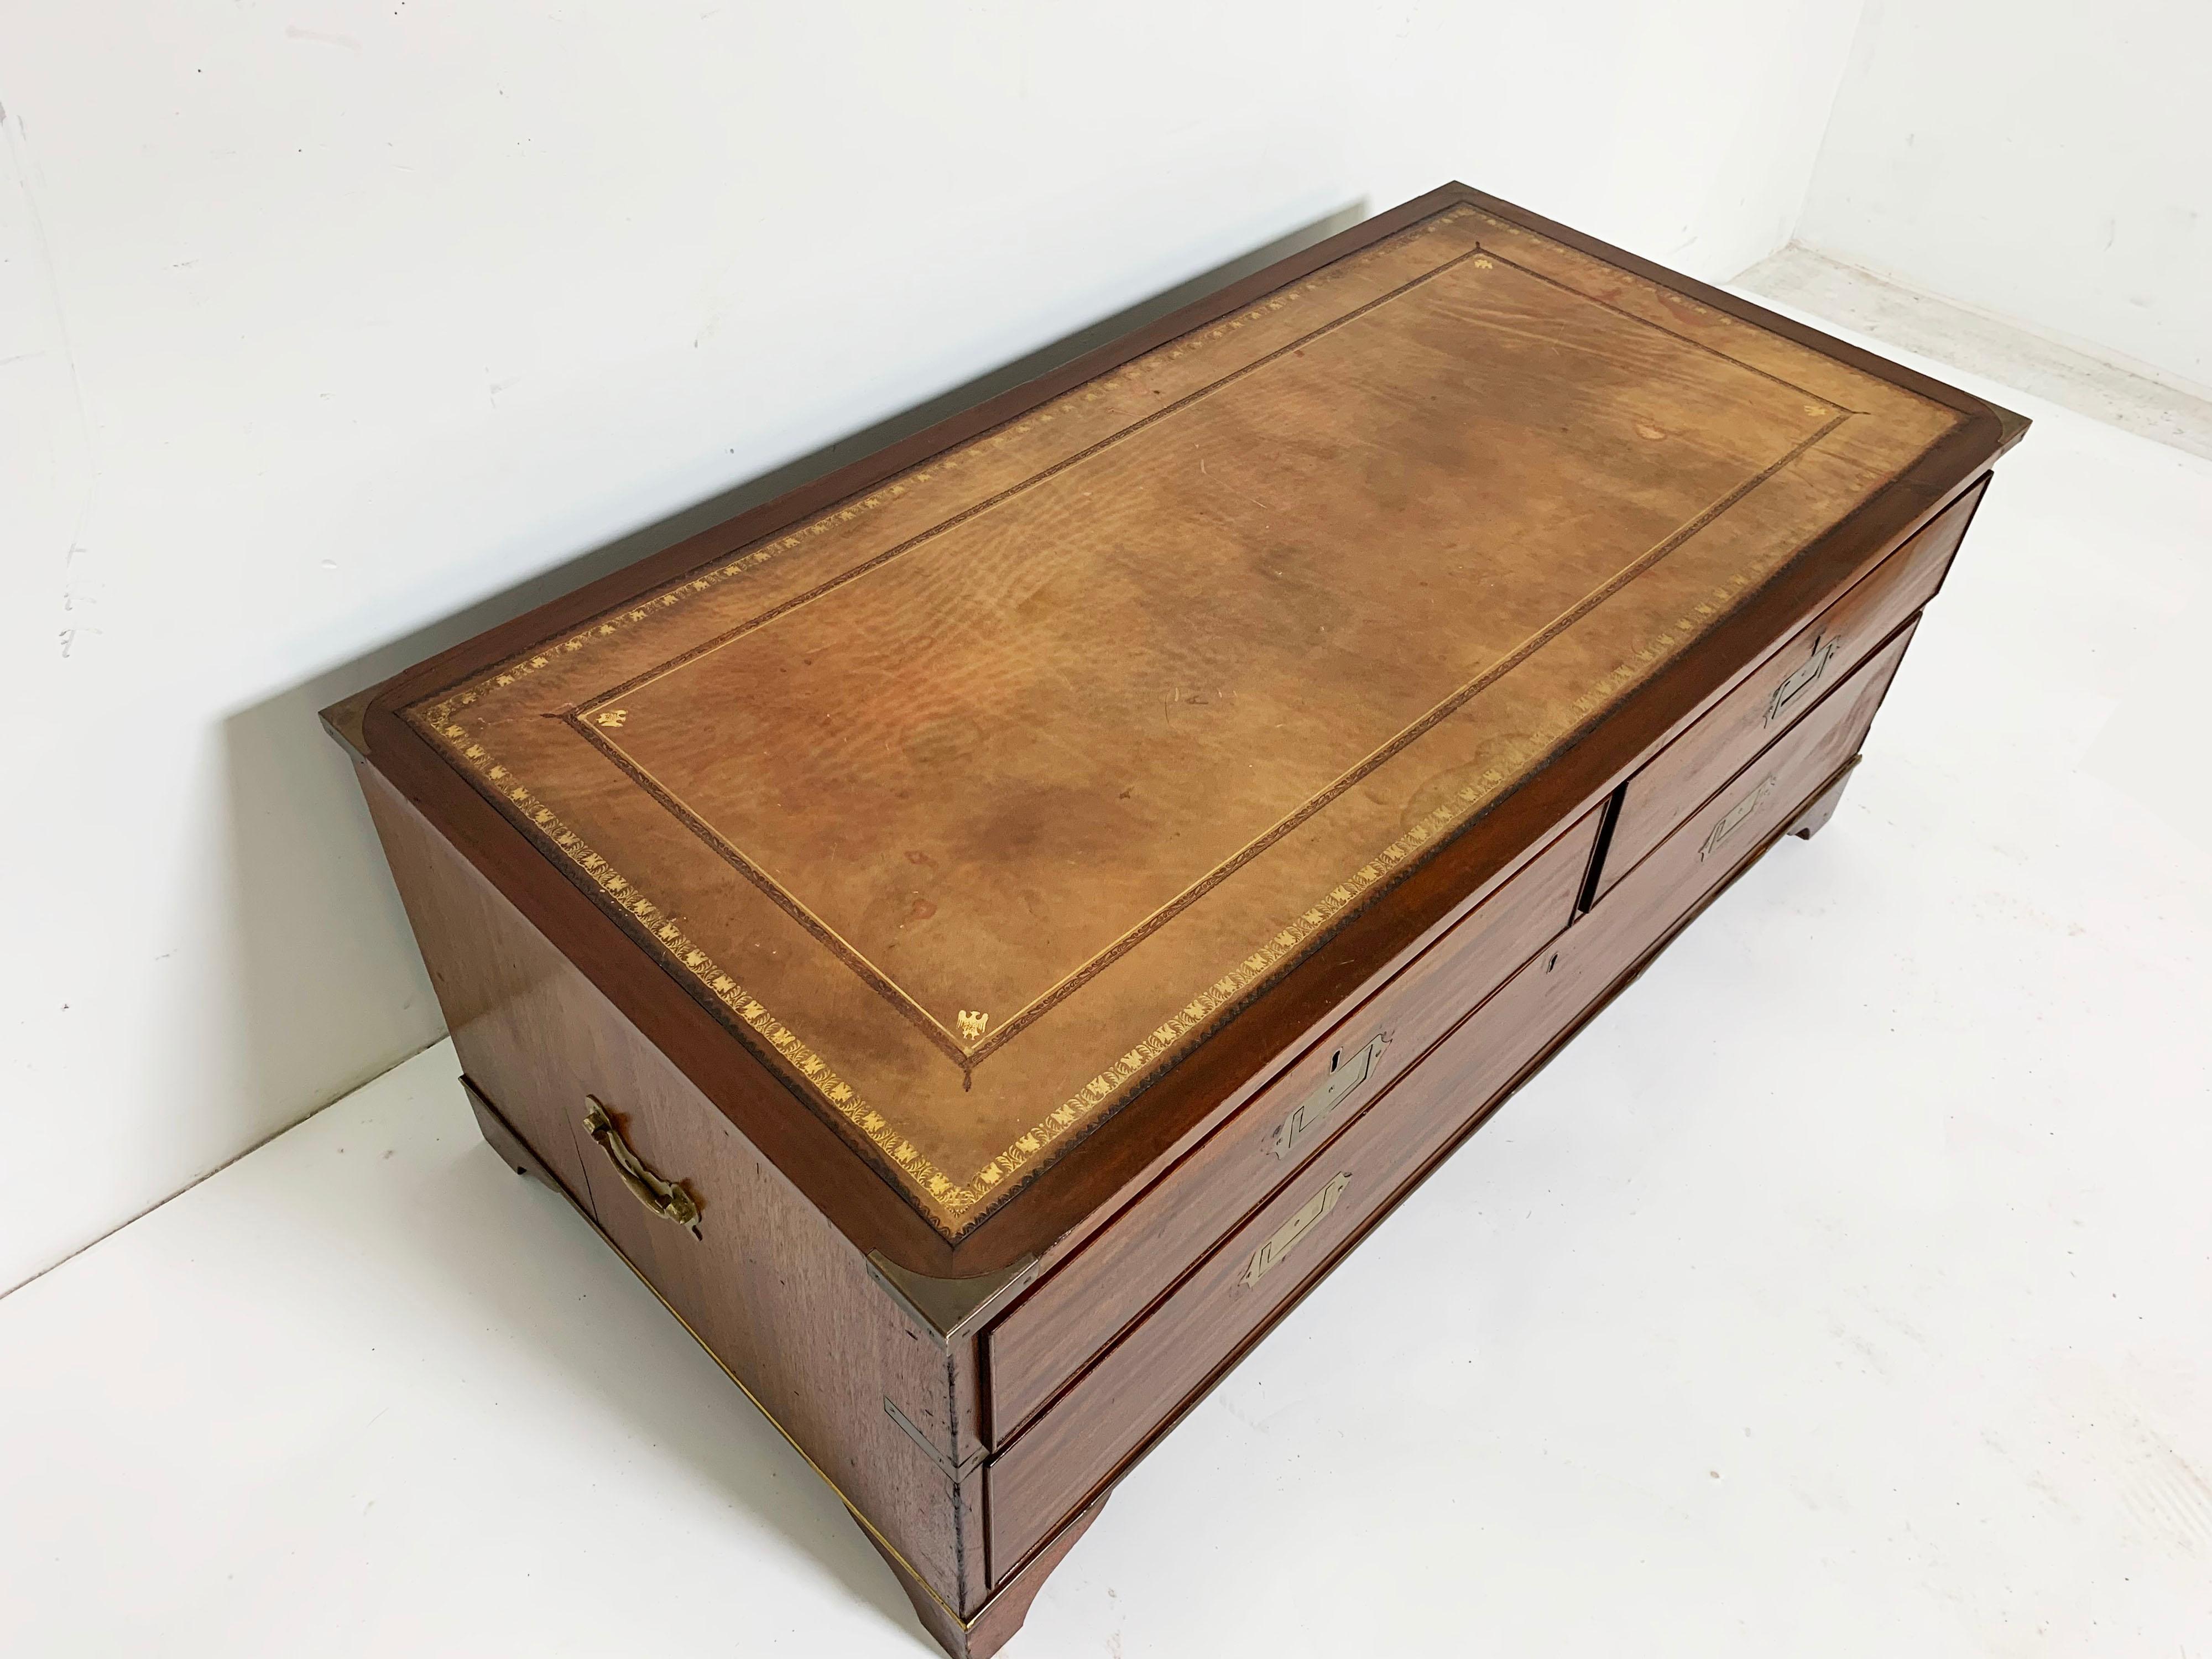 An antique British map chest coffee table in solid mahogany with leather top, circa late 19th-early 20th century.

